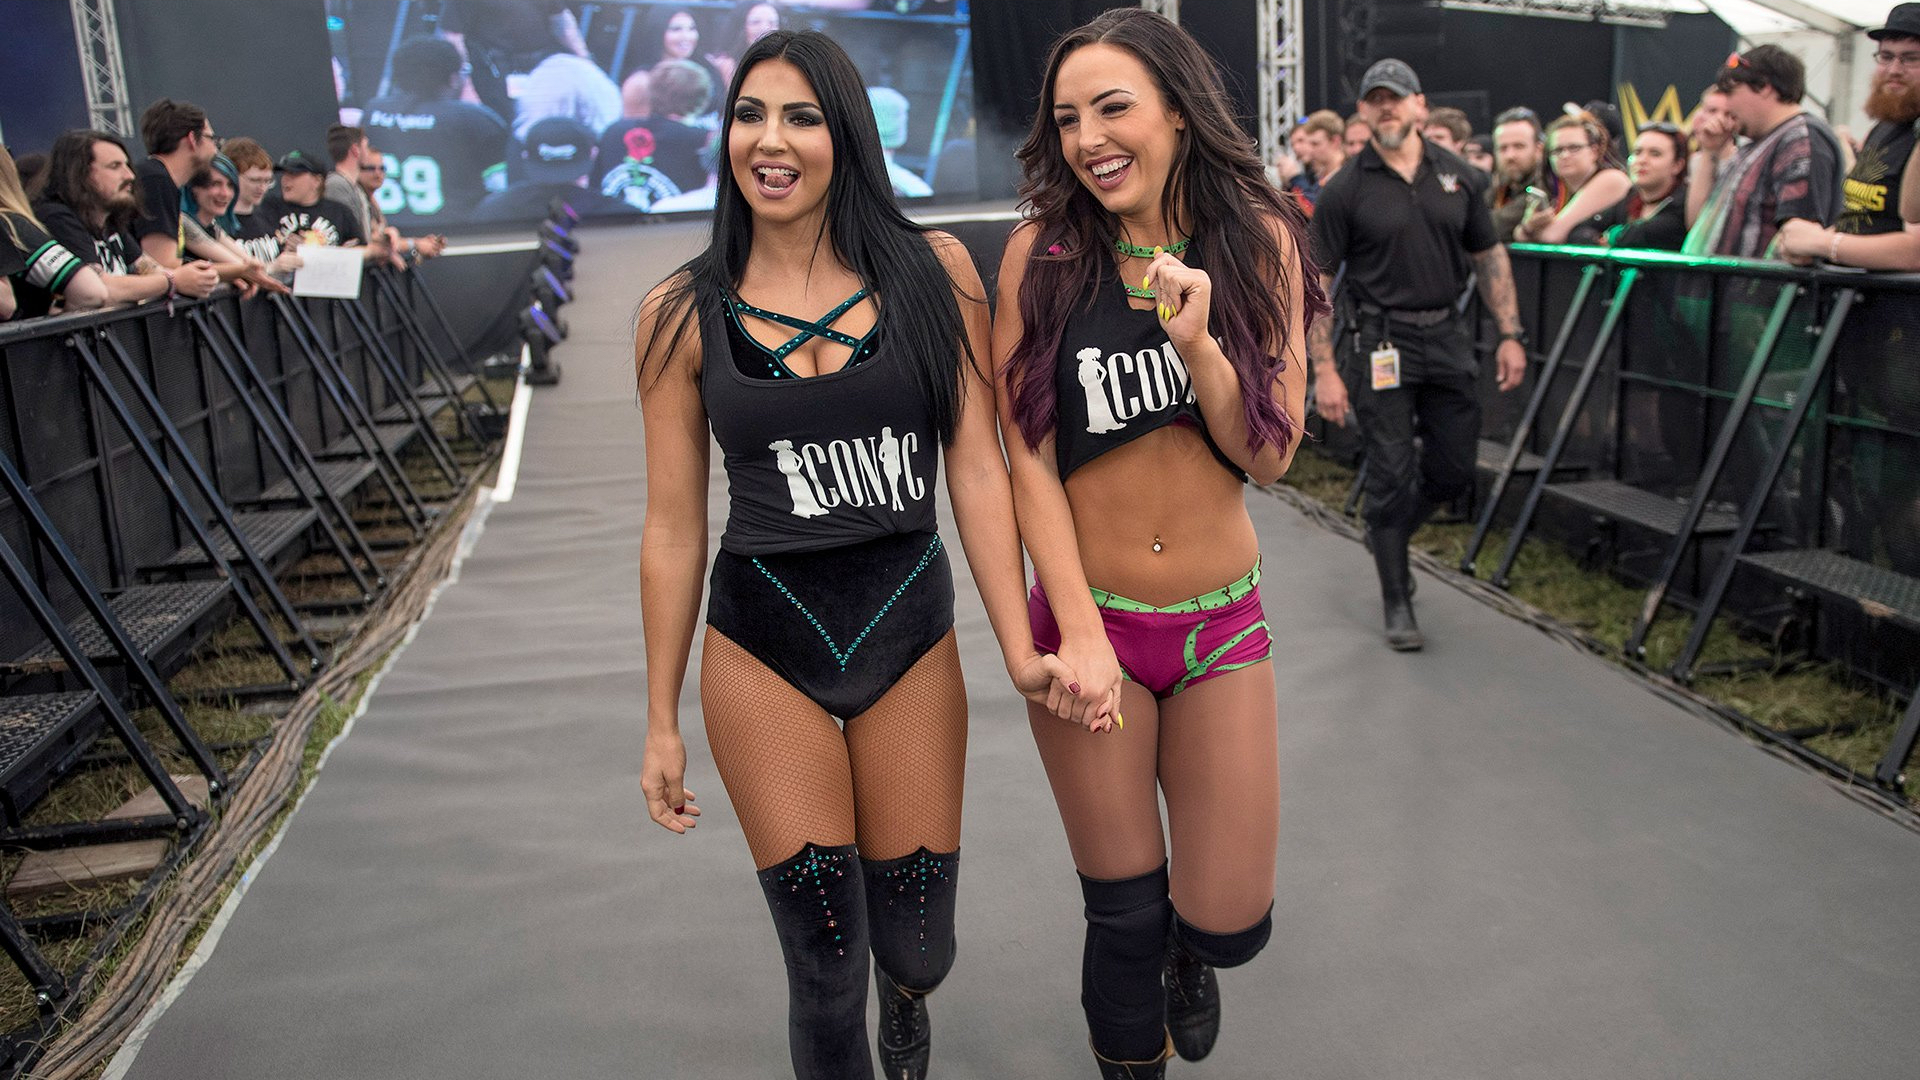 WWE is joining the World Cup party with attractive women 